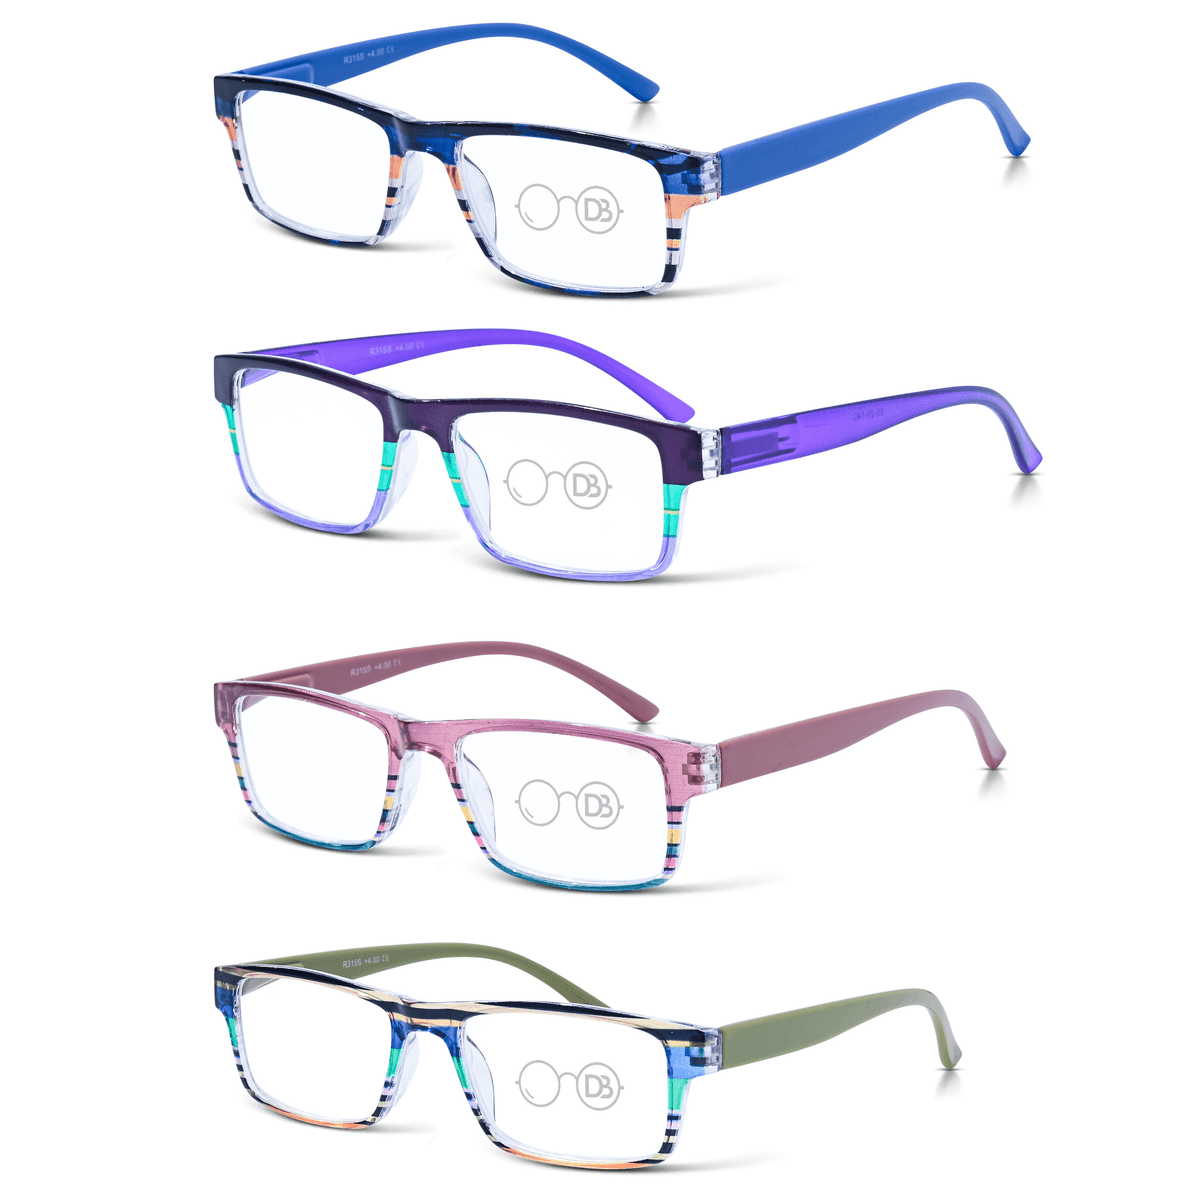 High Power Multi-Color Rectangle Reading Glasses- Nautical